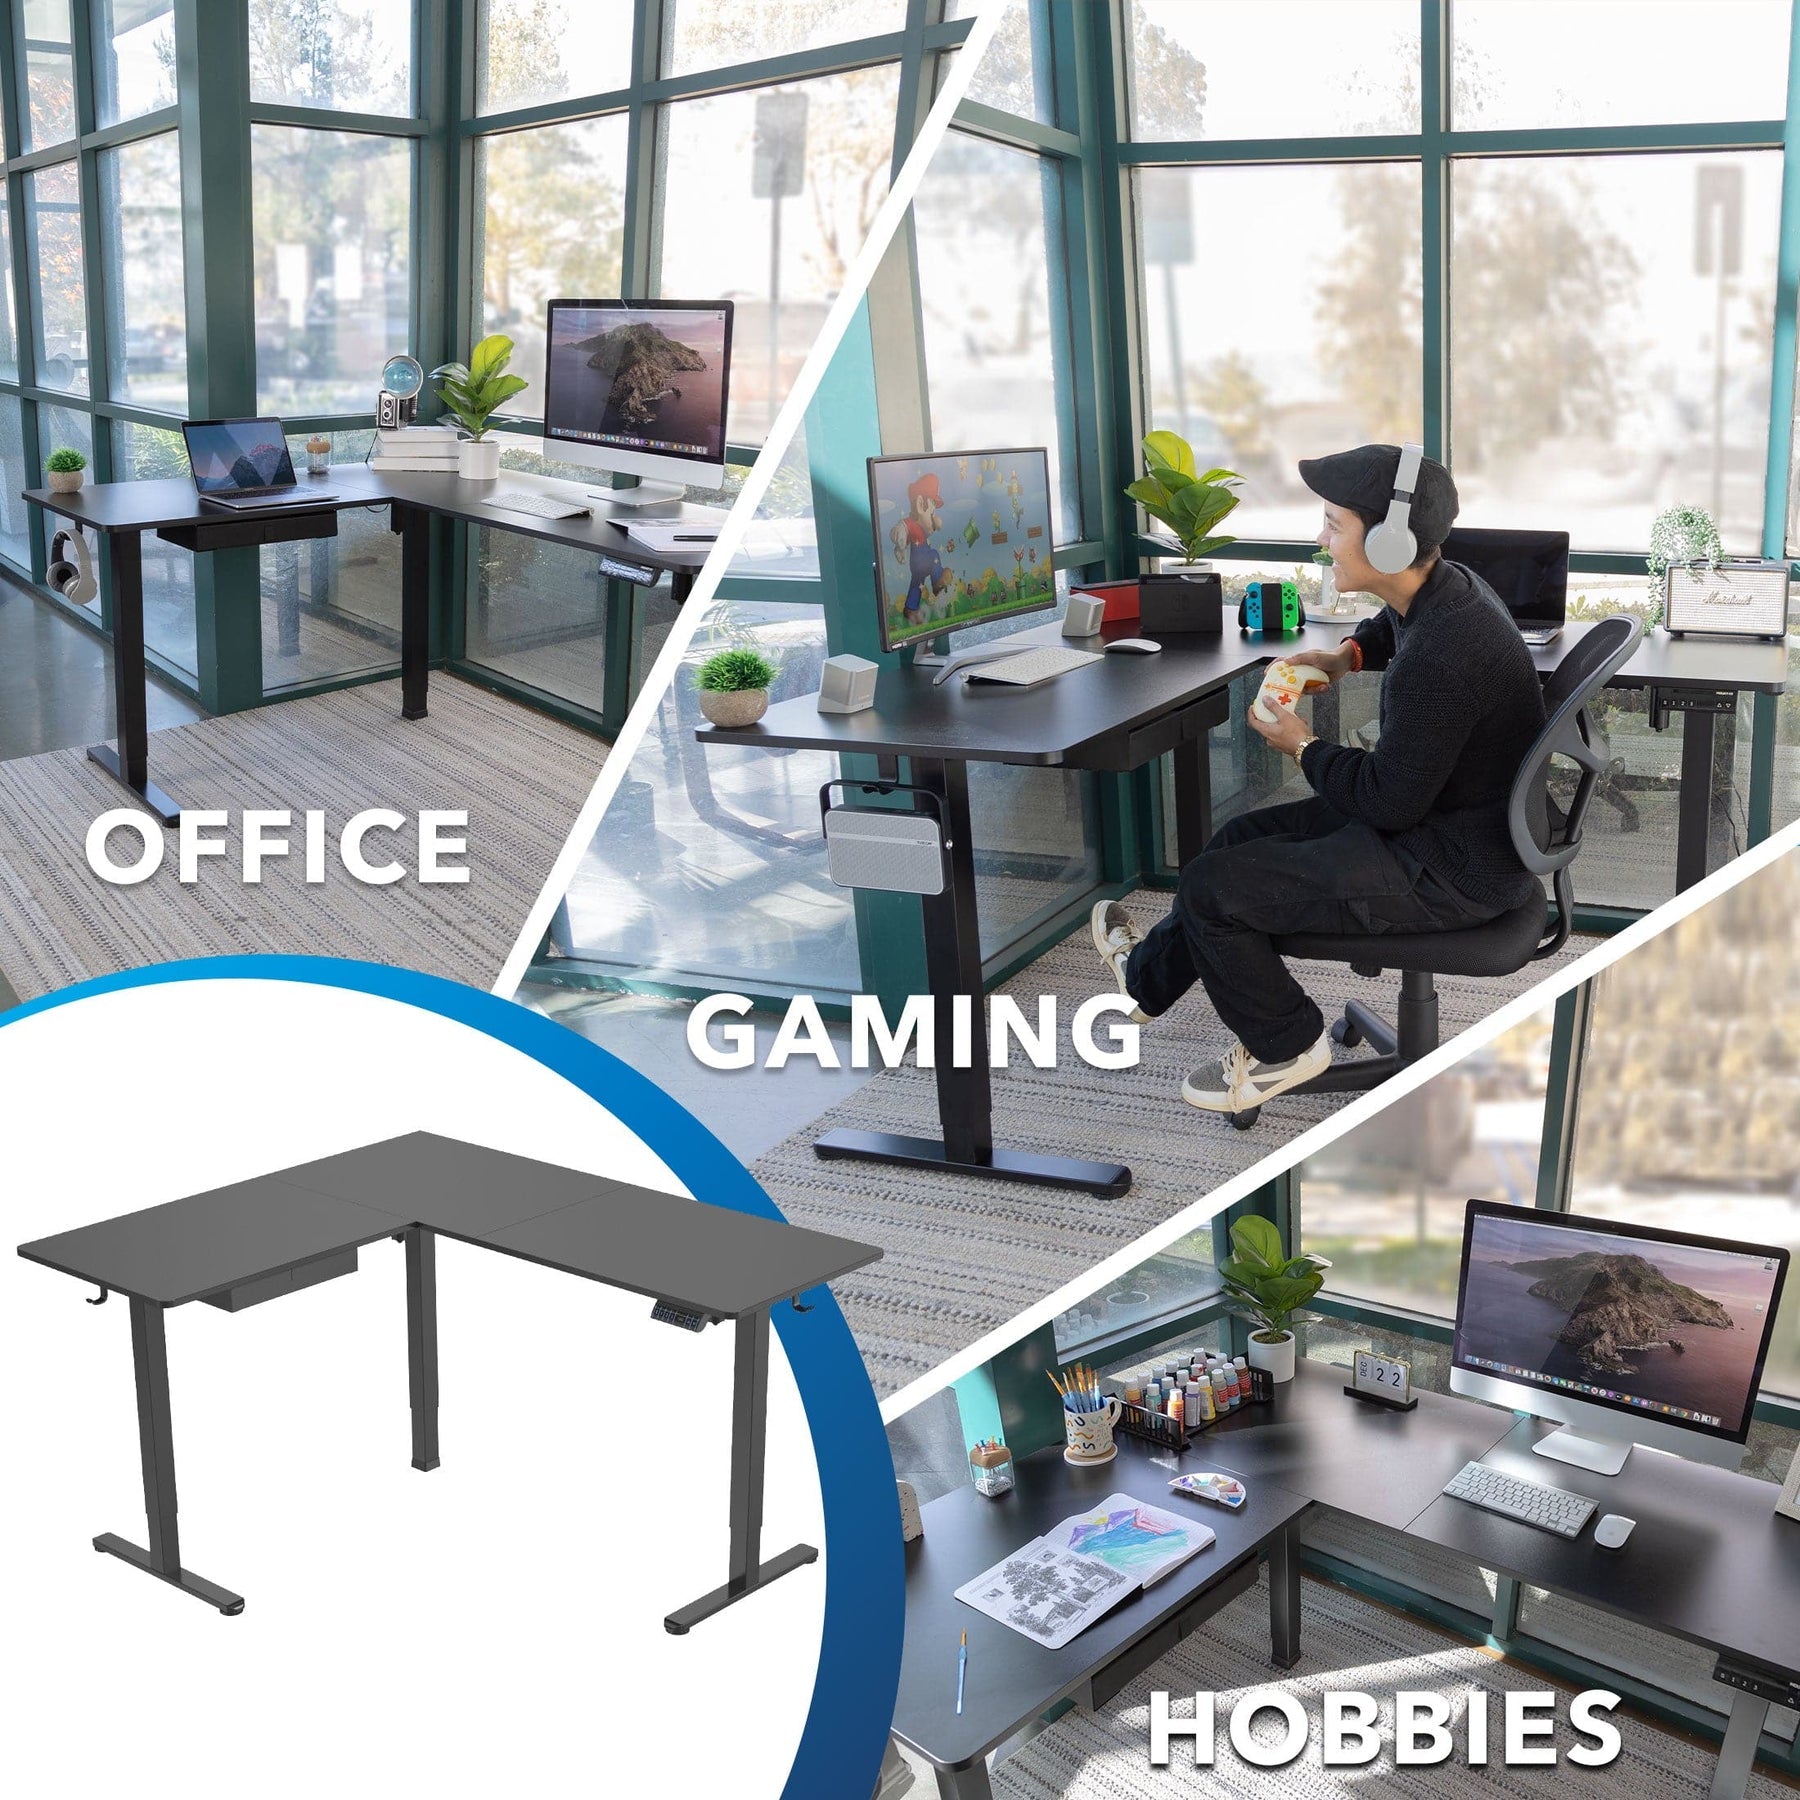 office, gaming, and hobbies